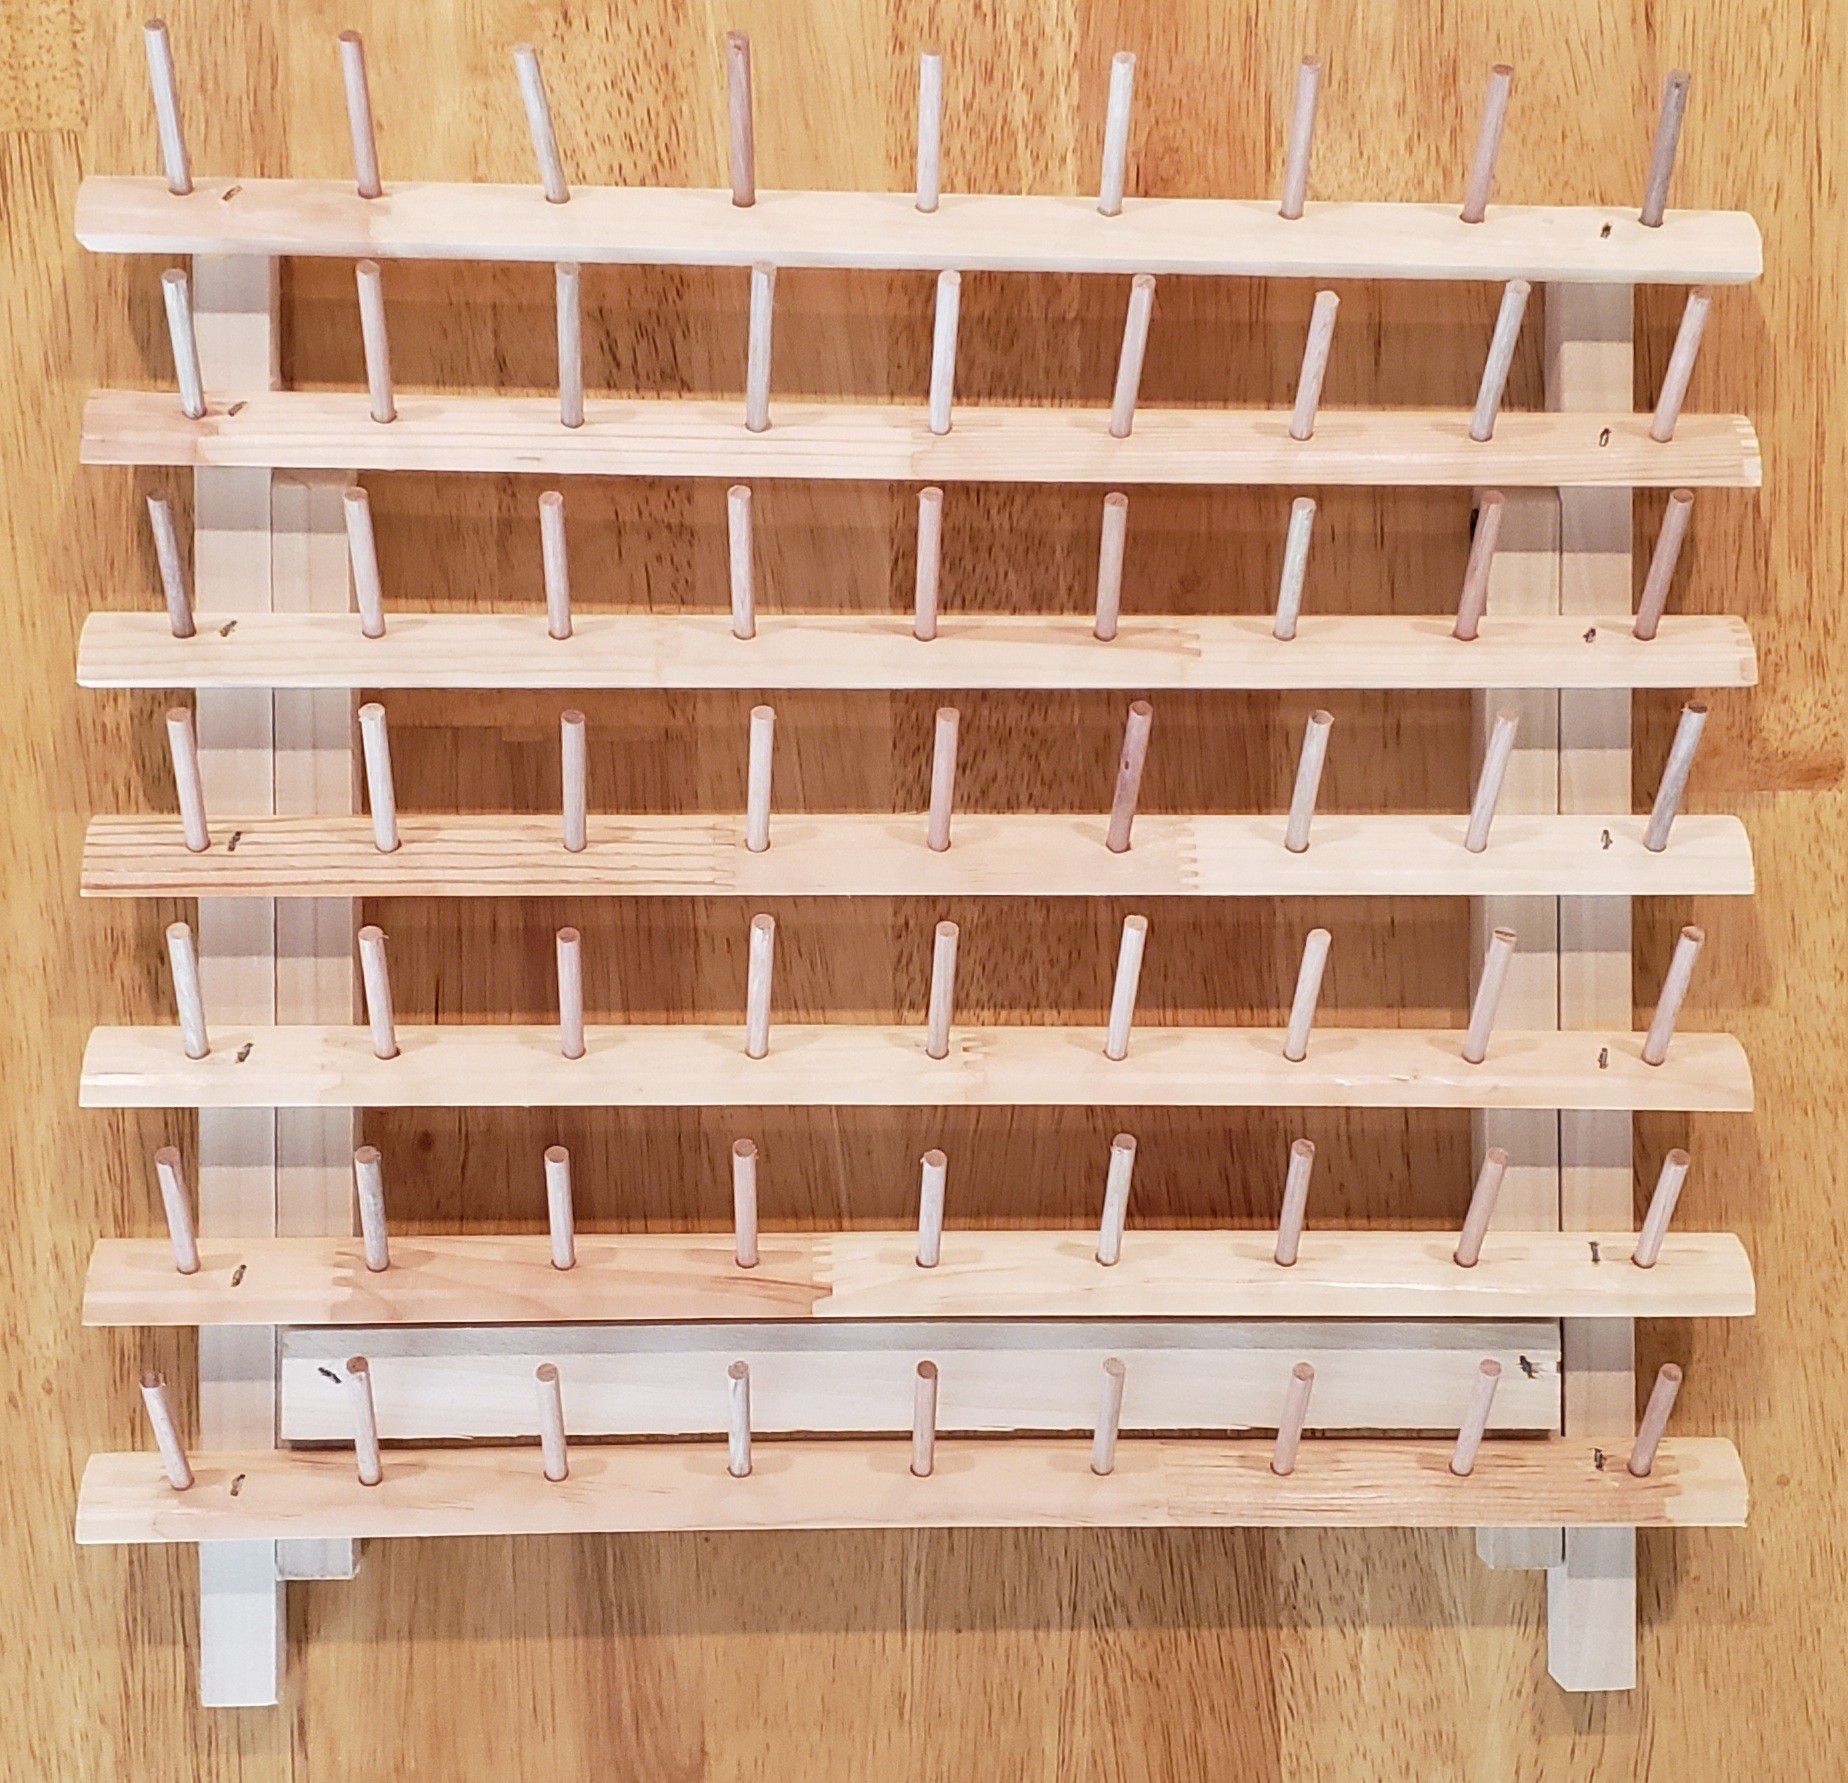 Wooden Thread Rack - Sewing & Embroidery Thread Holder